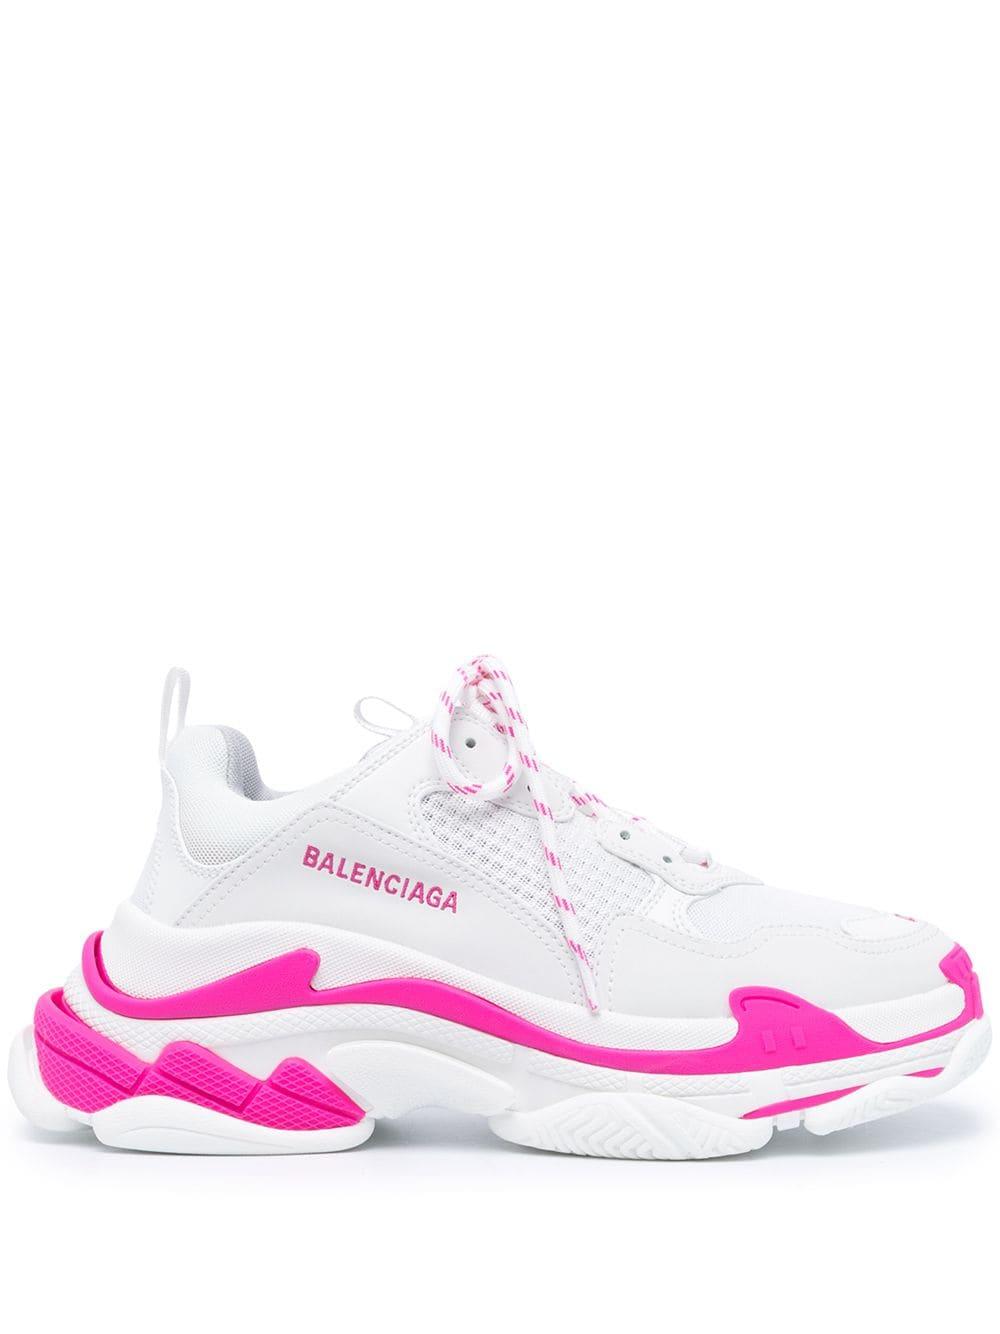 Balenciaga White And Pink Triple S Sneakers - Save 43% | Lyst